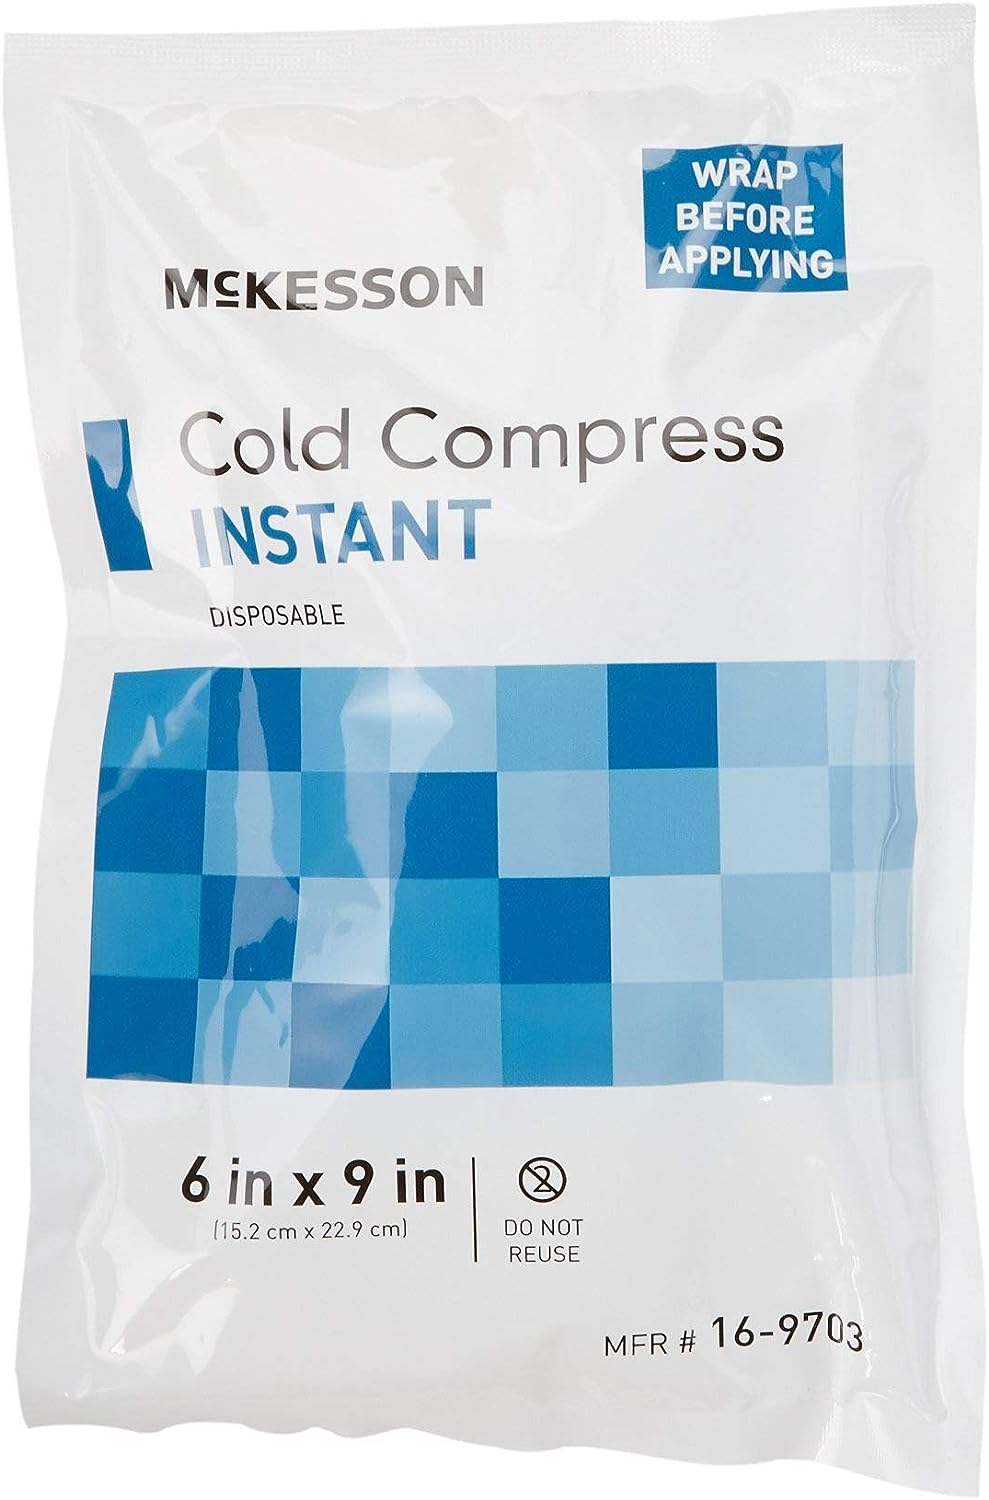 McKesson Cold Compress, Instant Cold Pack, Disposable, 6 in x 9 in, 1